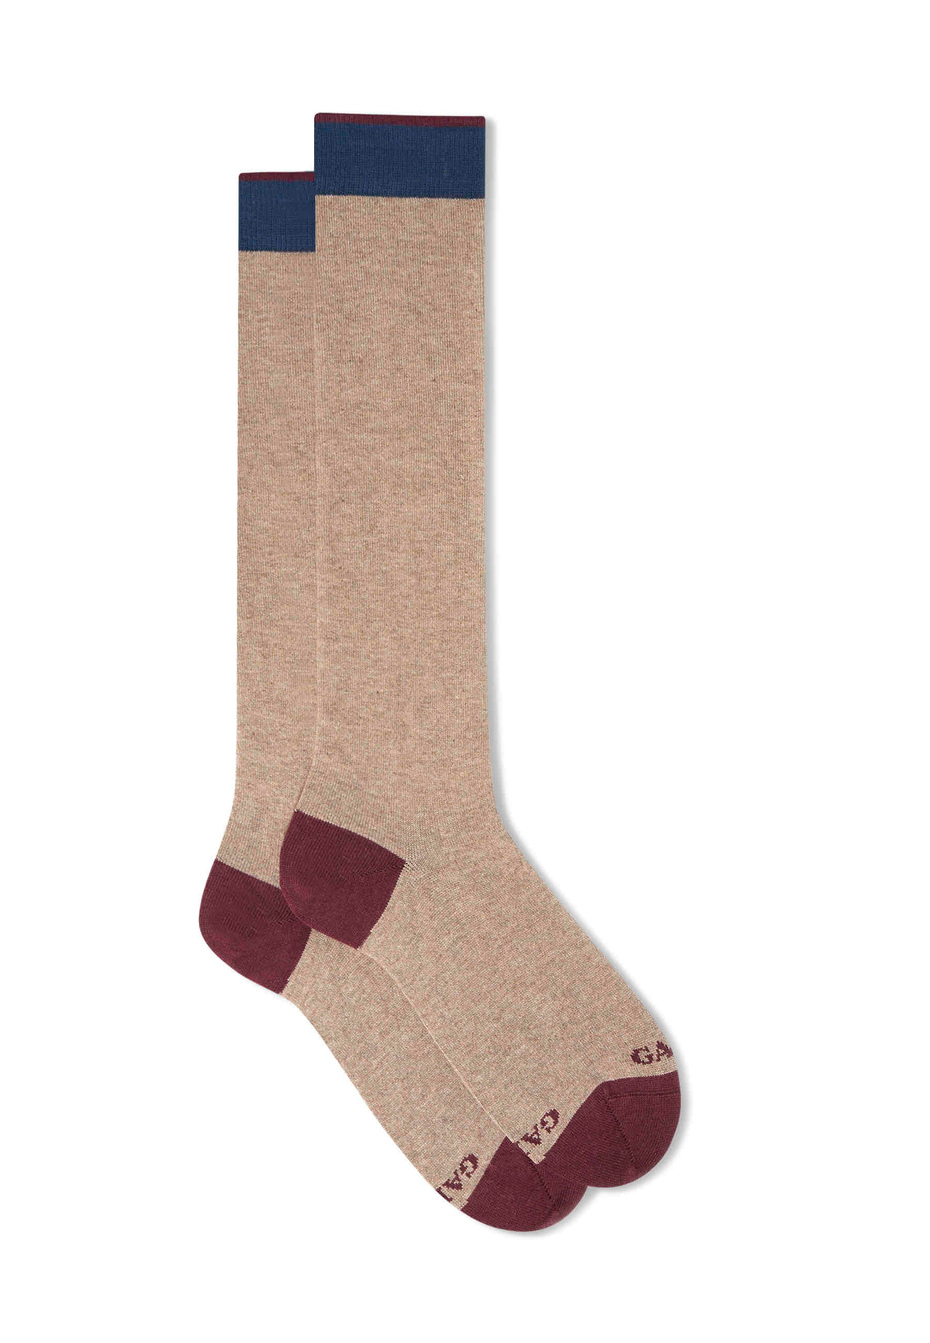 Women's long plain sand cotton and cashmere socks with contrasting details - Gallo 1927 - Official Online Shop